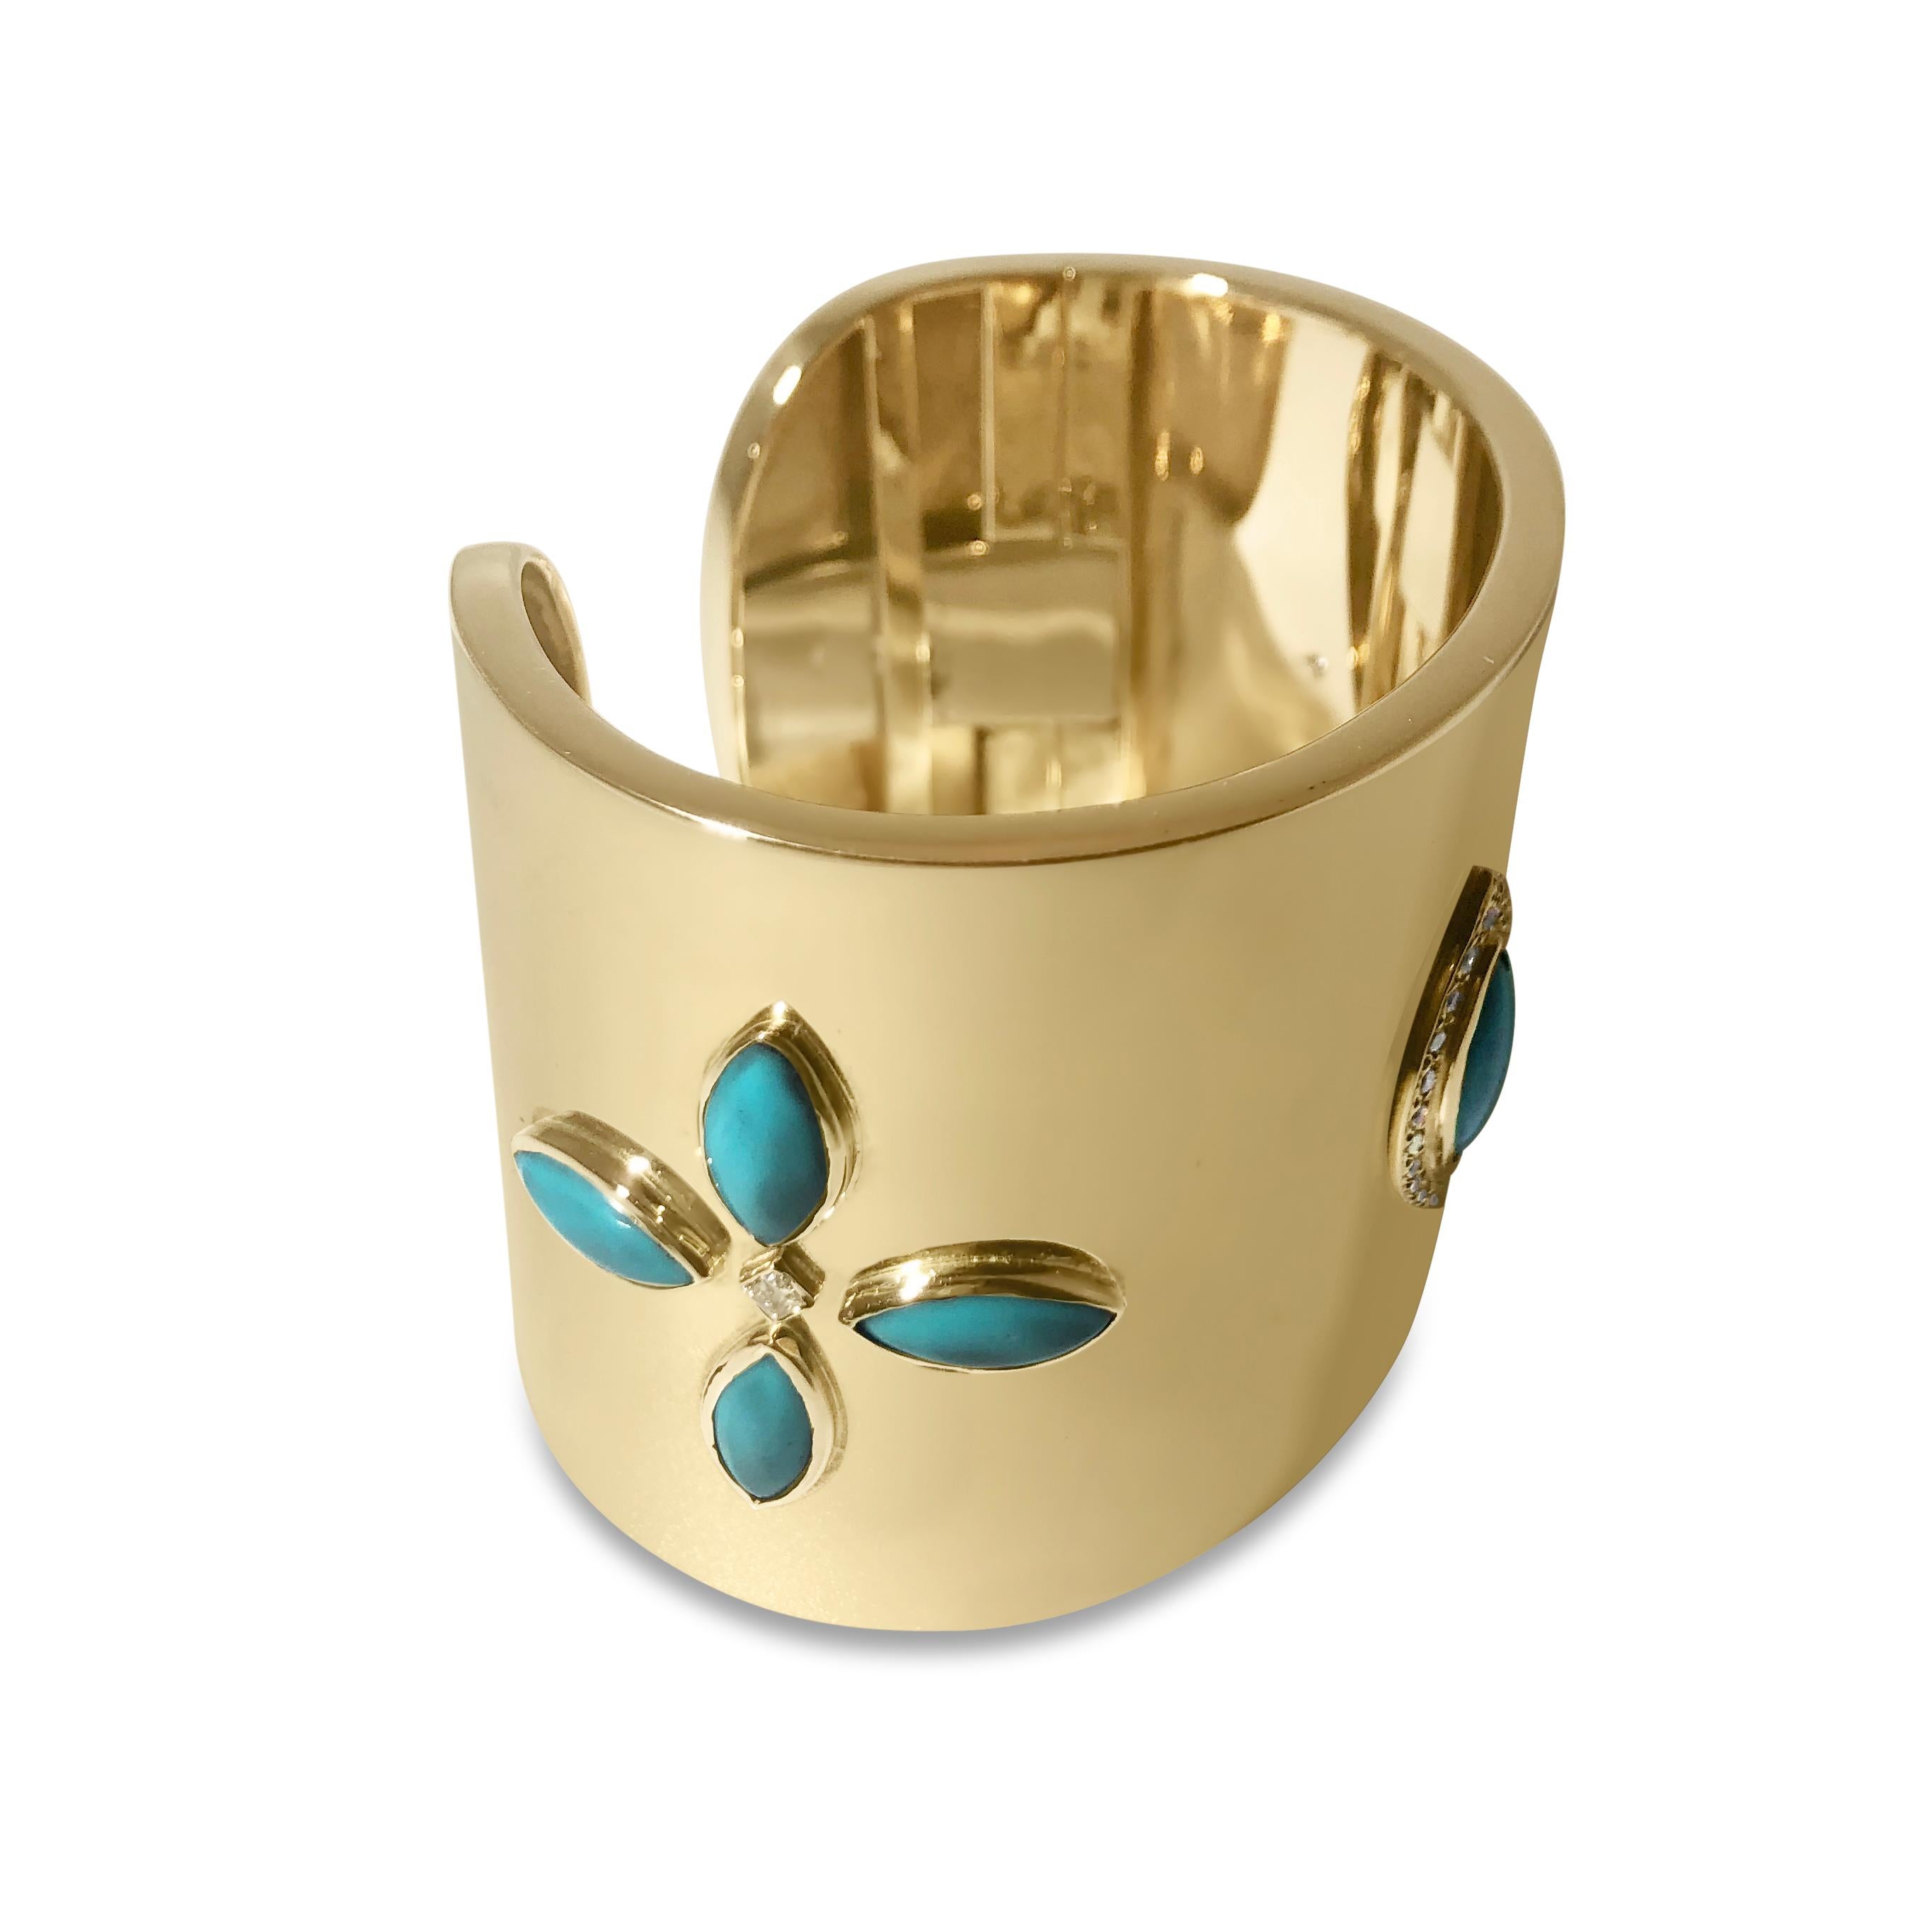 Our statement cuff will wow you and everyone else who sees it! This 2 inch back-hinged cuff bracelet features high shine 14K yellow gold with 24 round 1.6mm and 2.4mm white diamonds, totaling 0.60ct, and 9 polished turquoise